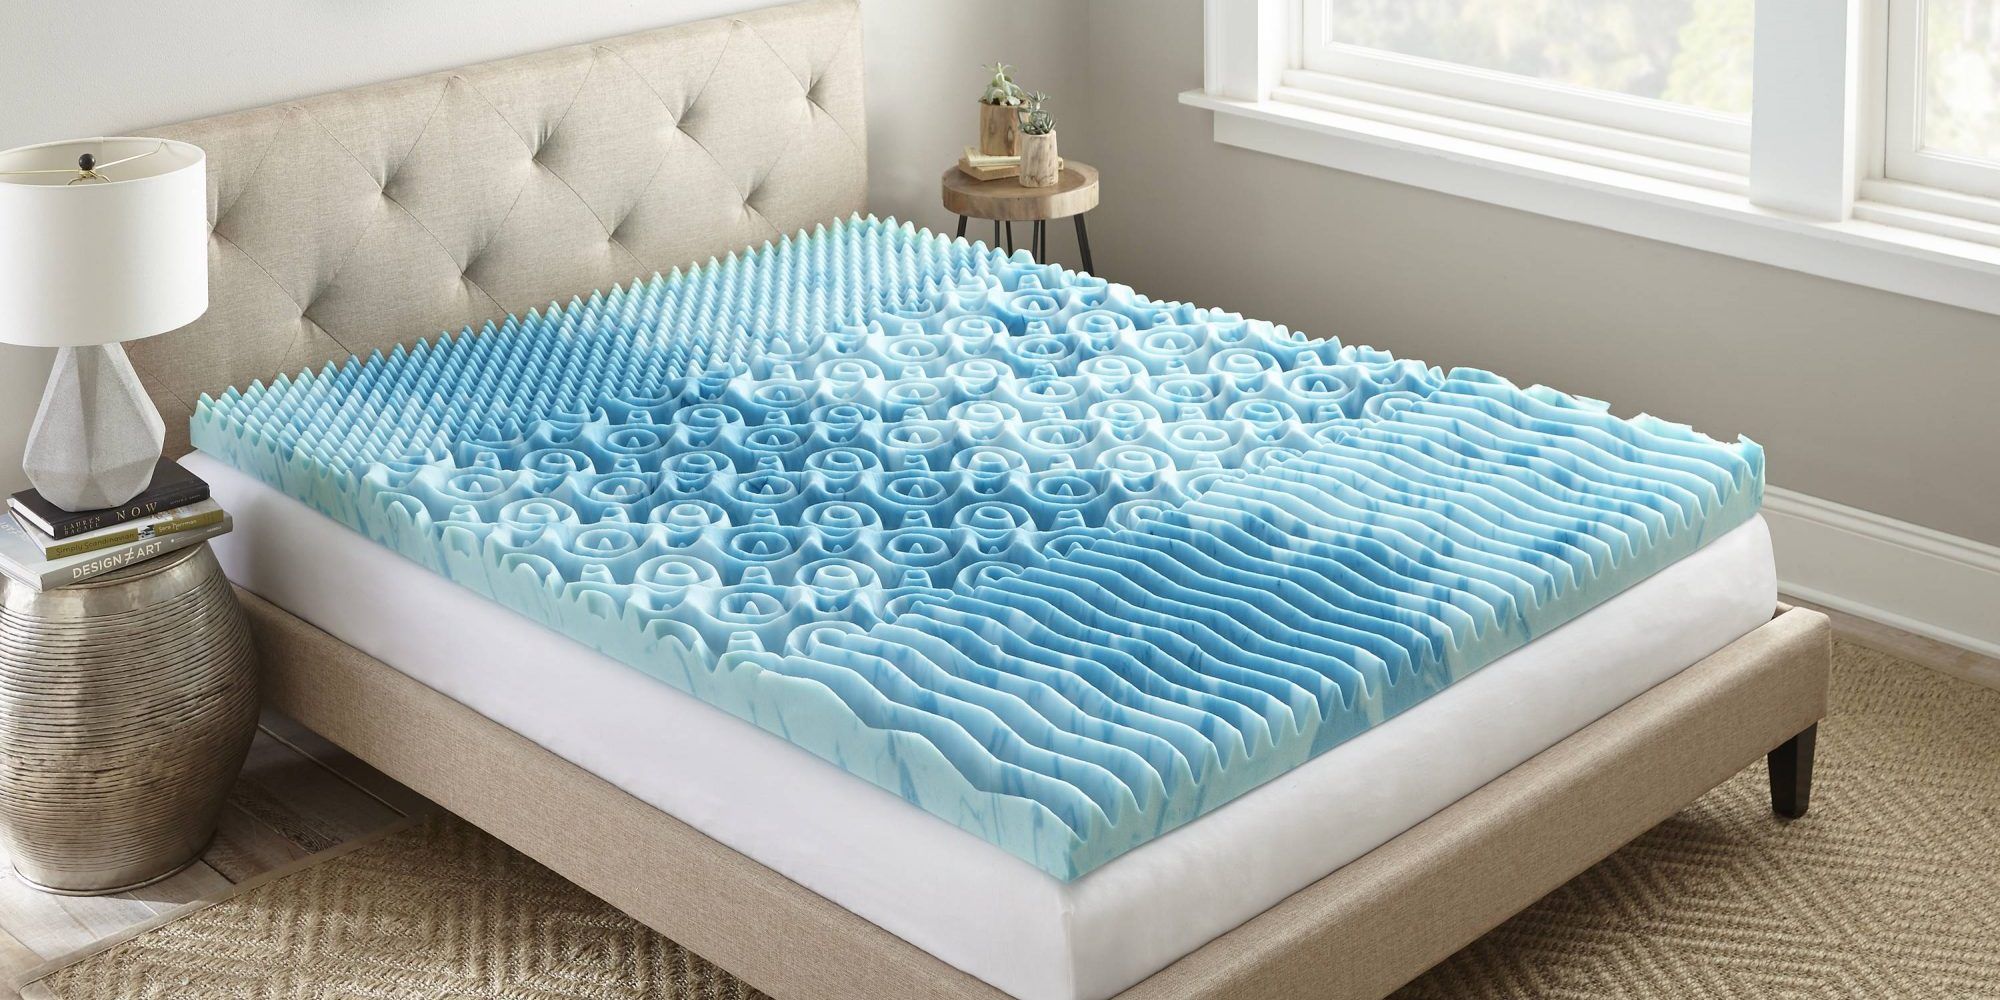 Why Mattress Toppers Are Great for Back Pain Relief ReviewThis